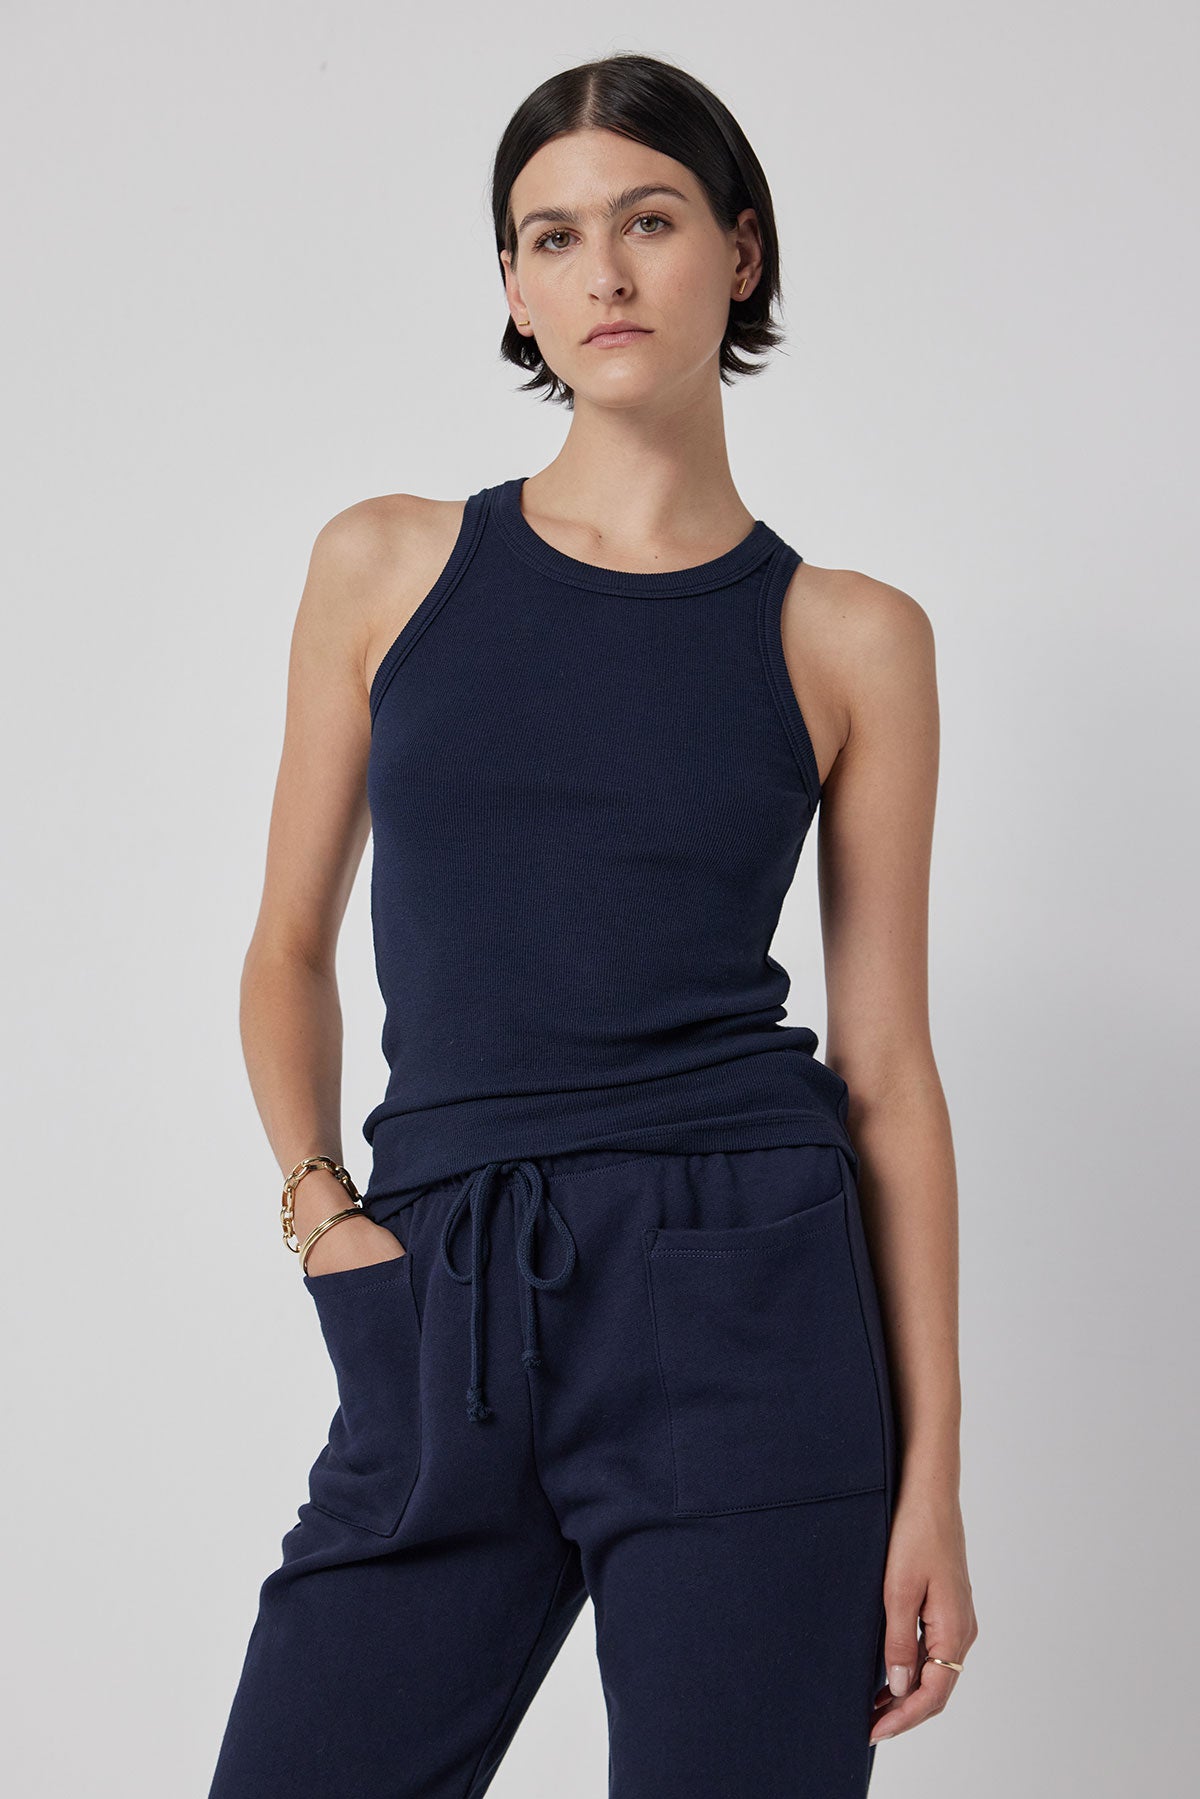   The model is wearing a navy CRUZ tank top and stretch sweatpants by Velvet by Jenny Graham. 